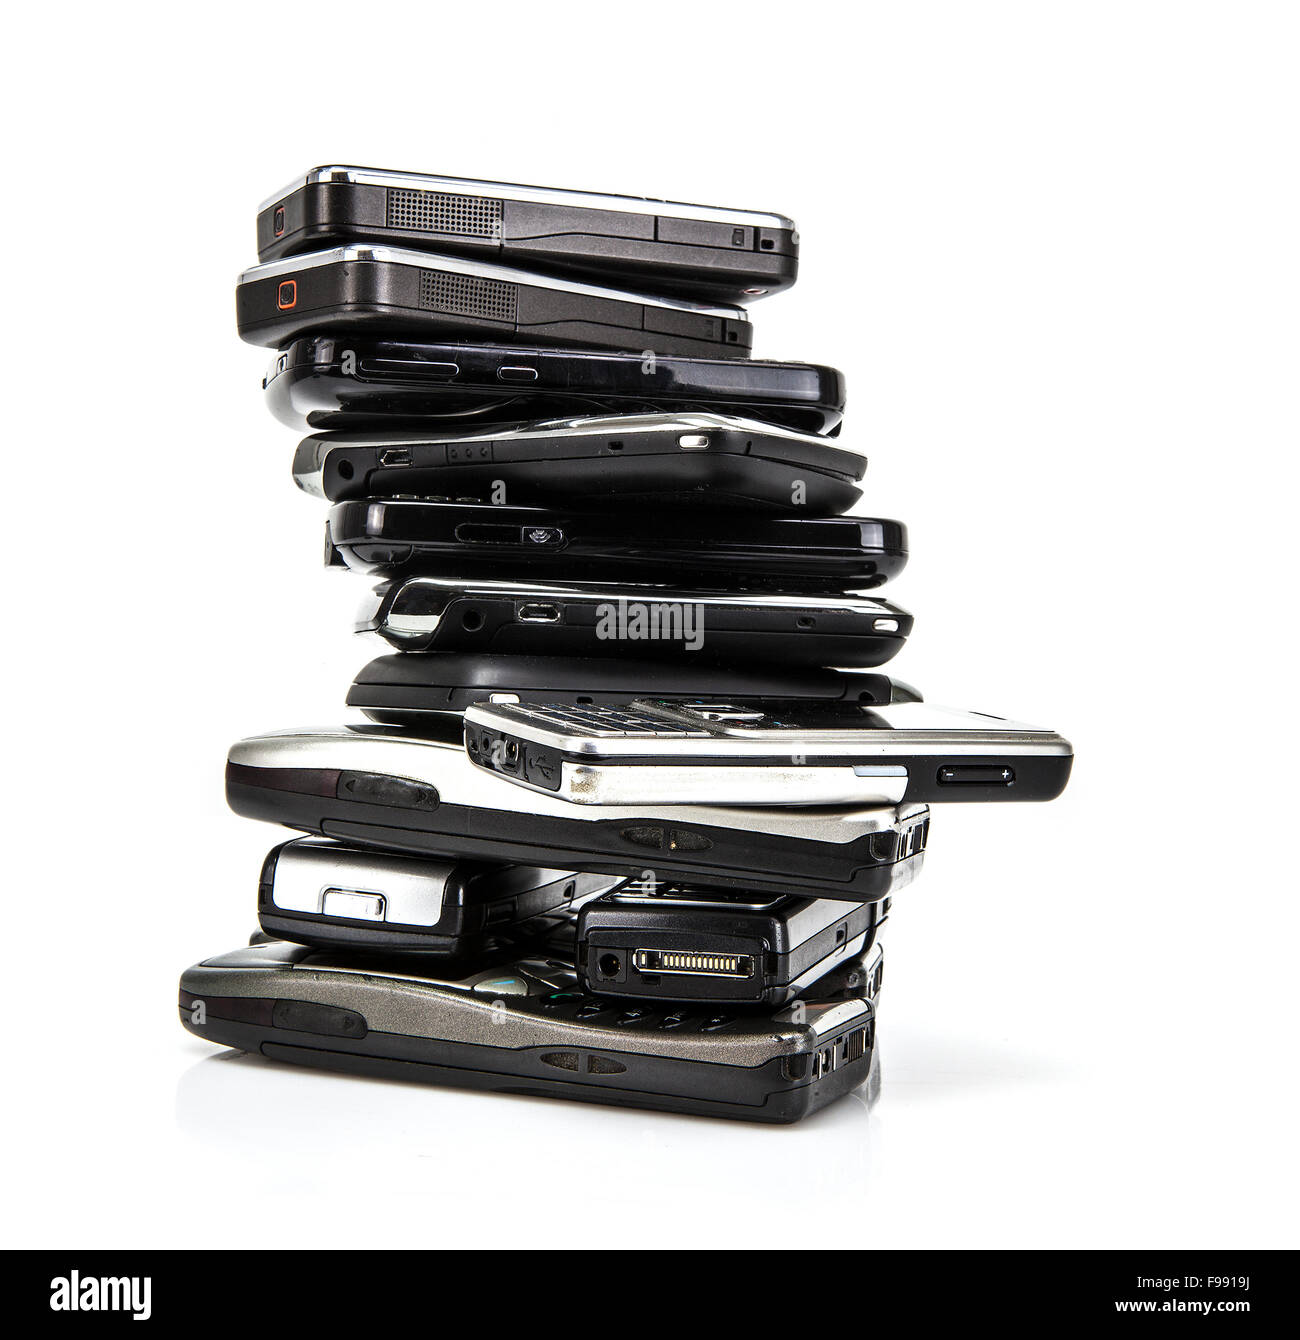 Pile of old mobile phones ready for recycling Stock Photo